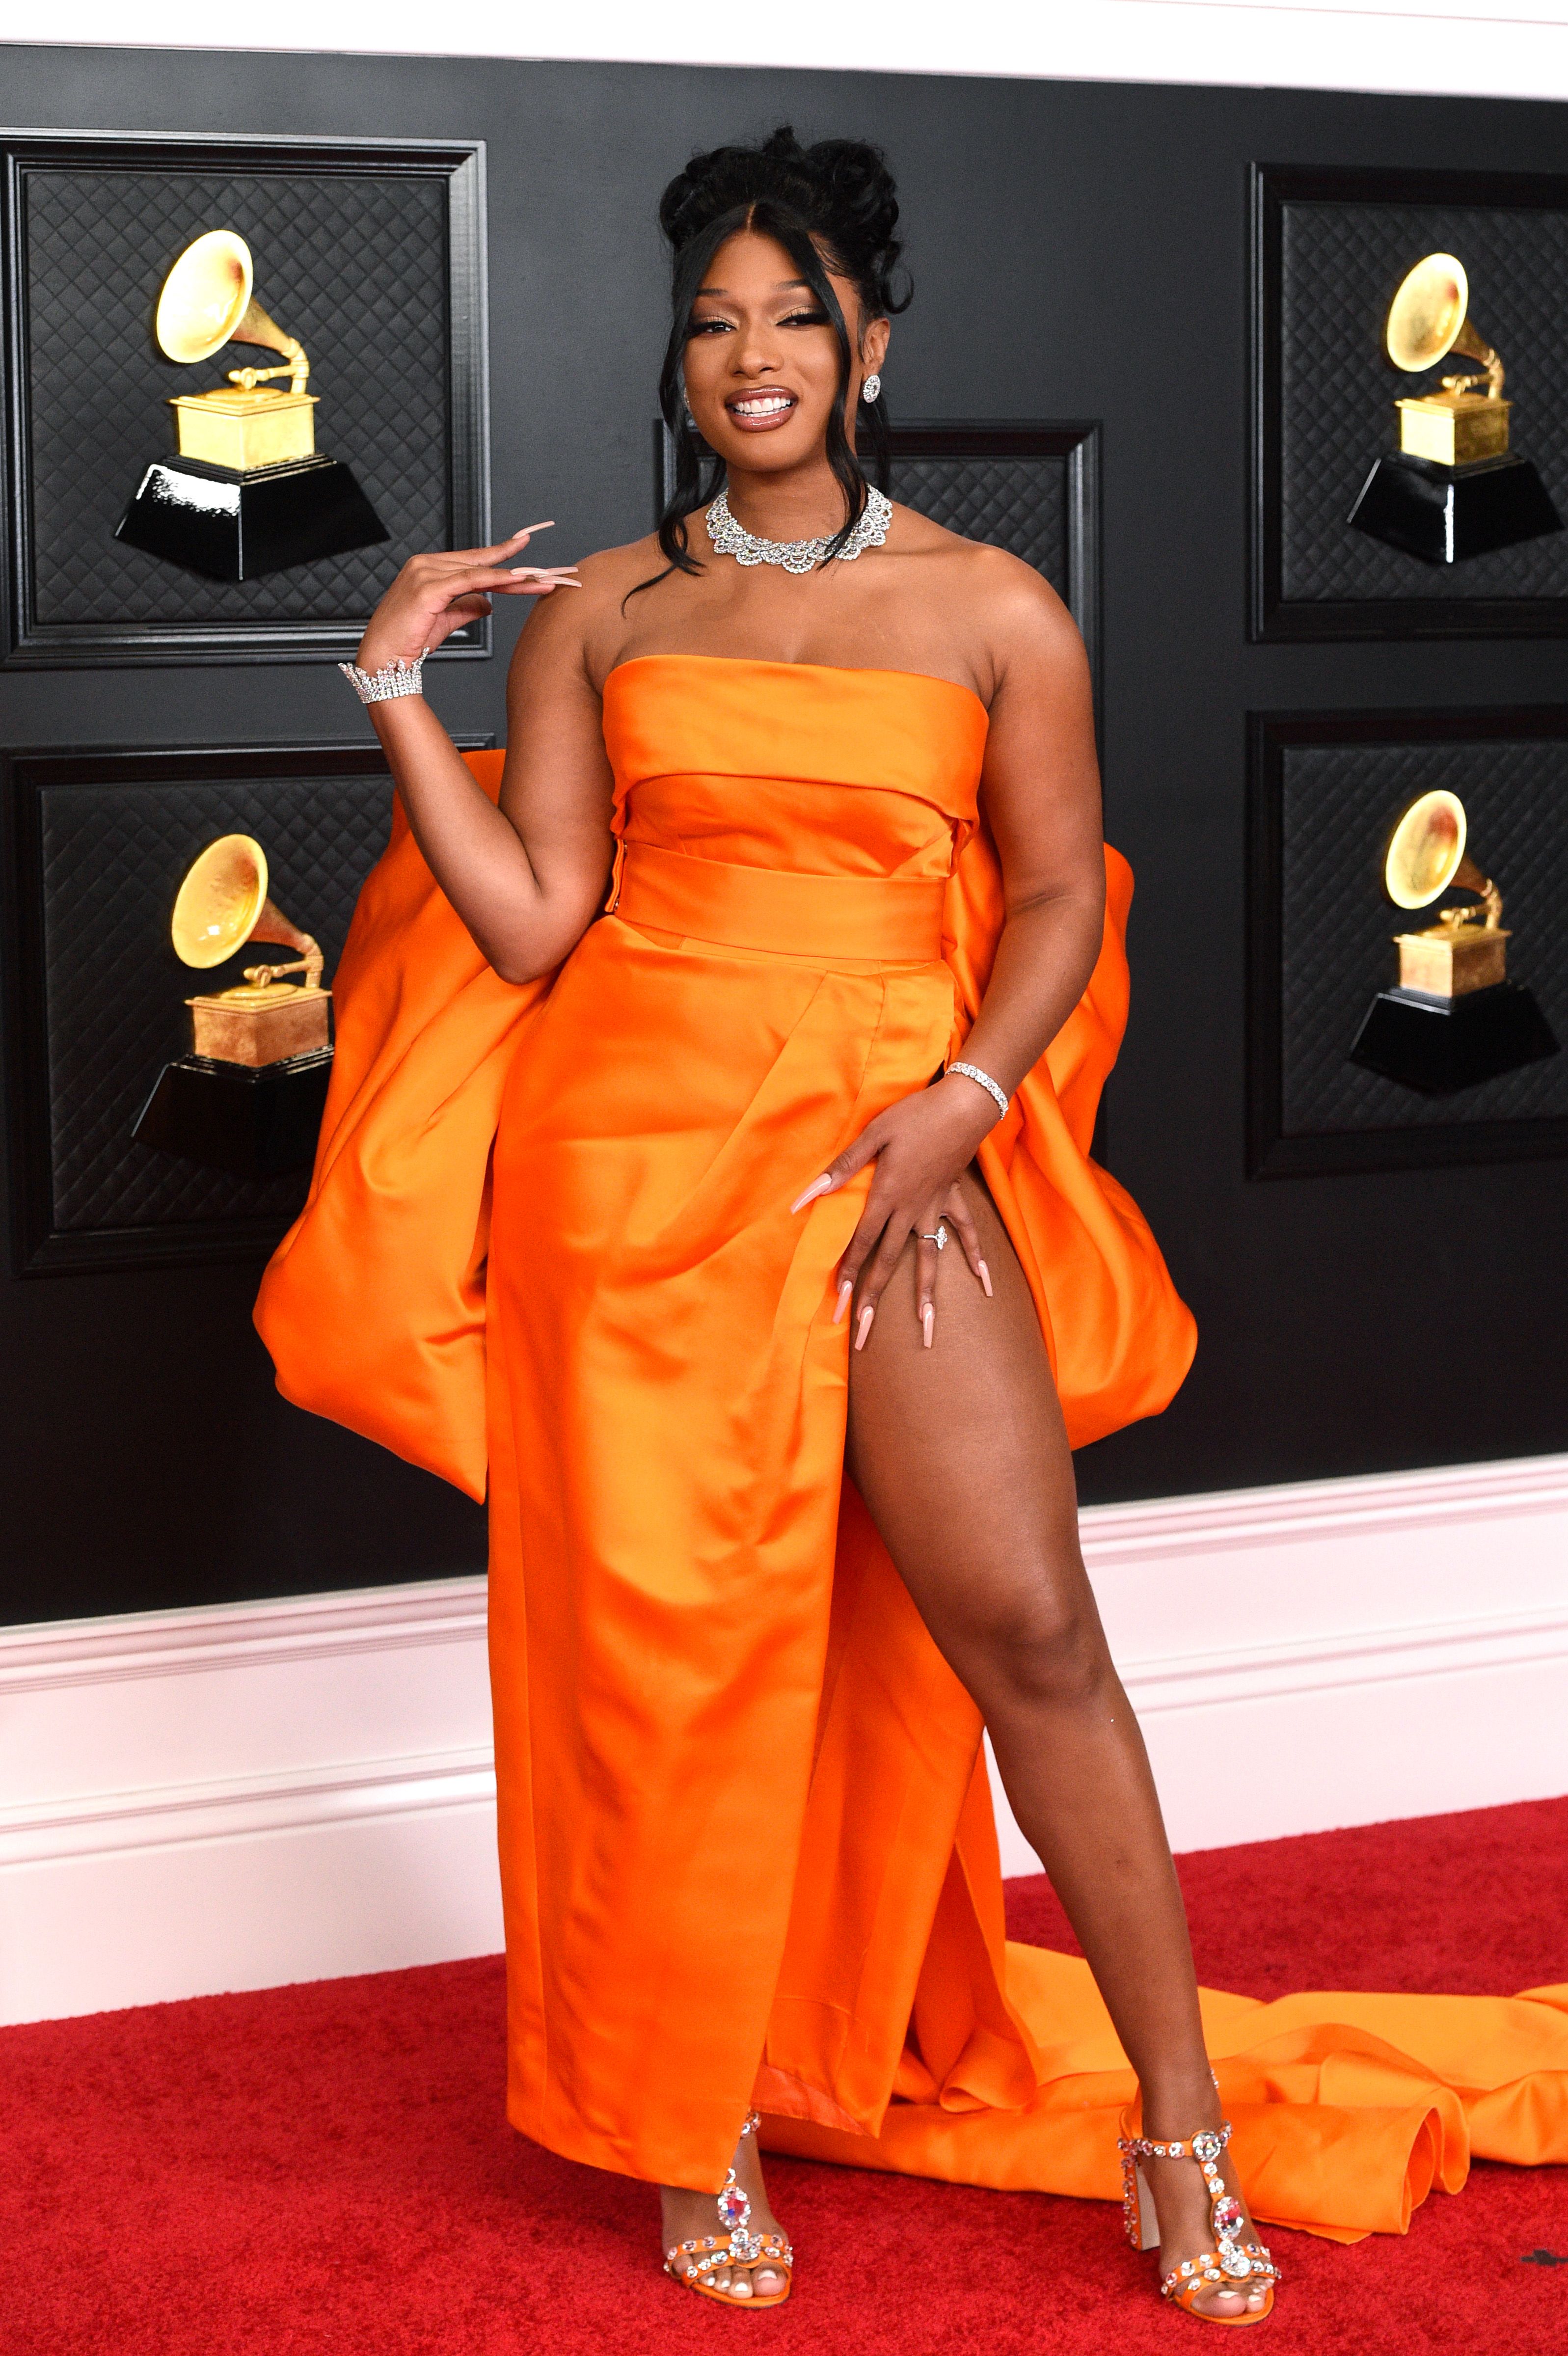 Grammy Awards: See all the pics from the red carpet